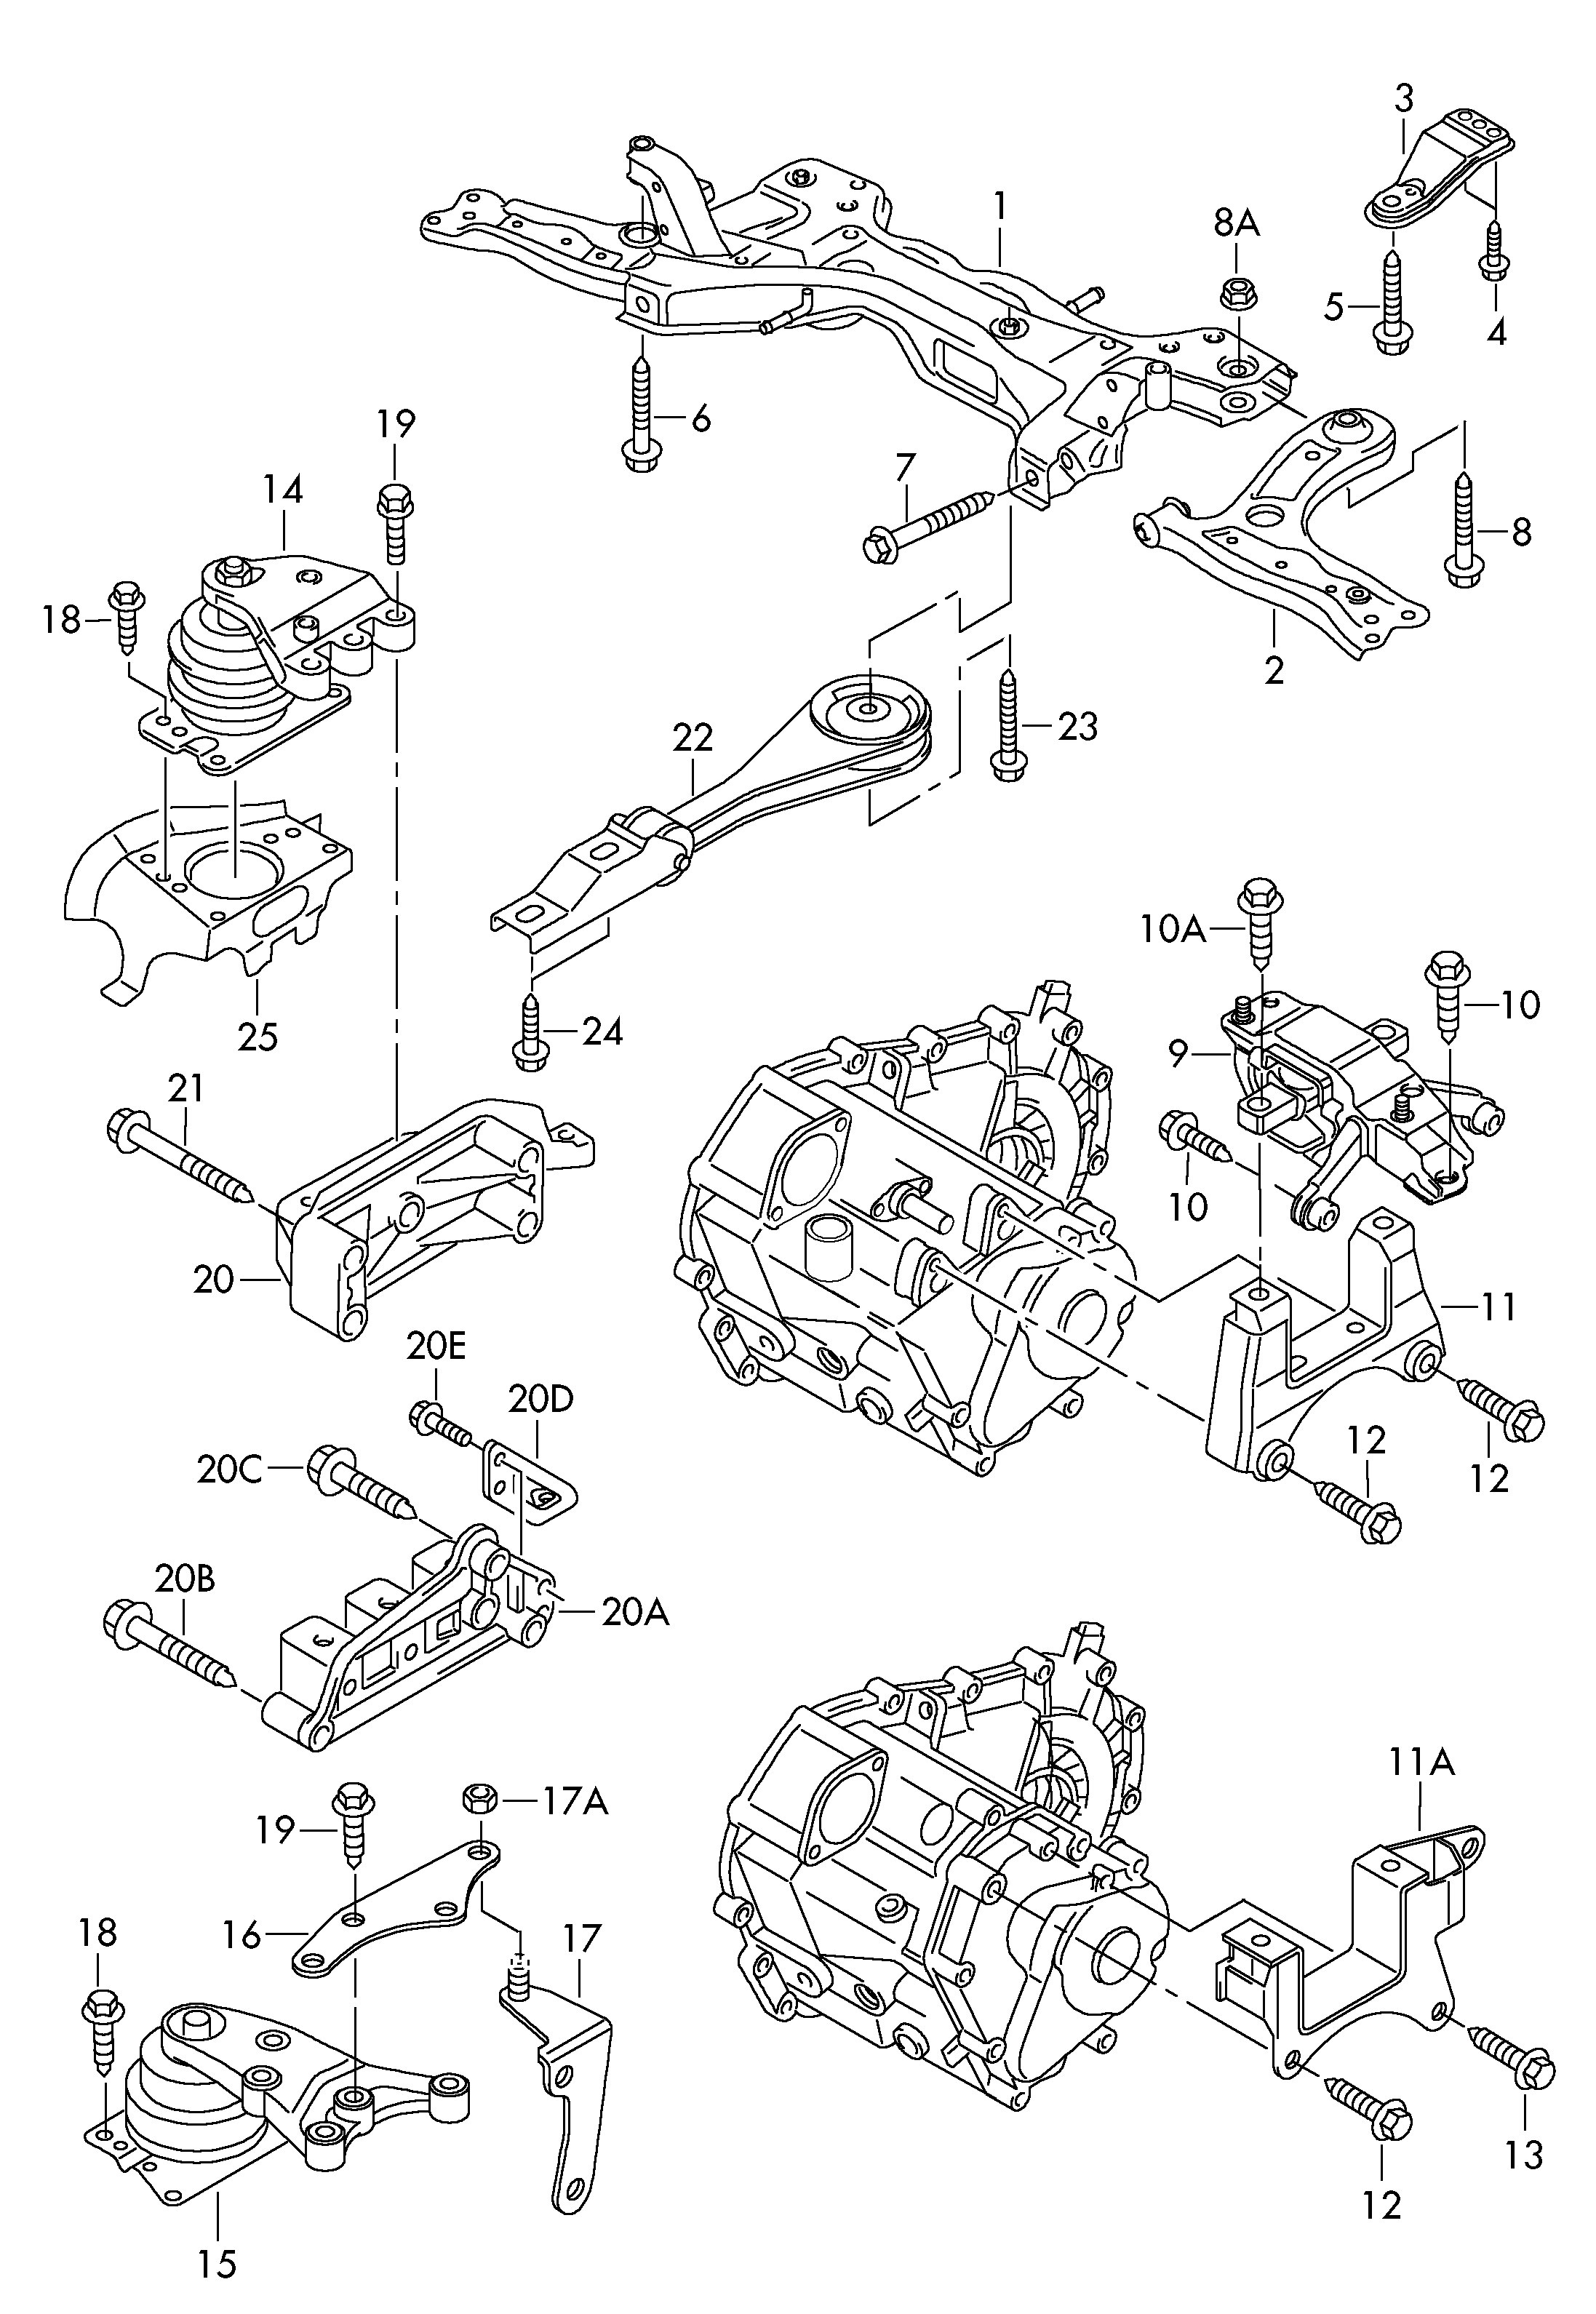 mounting parts for engine and
transmission - Rapid(RAP)  